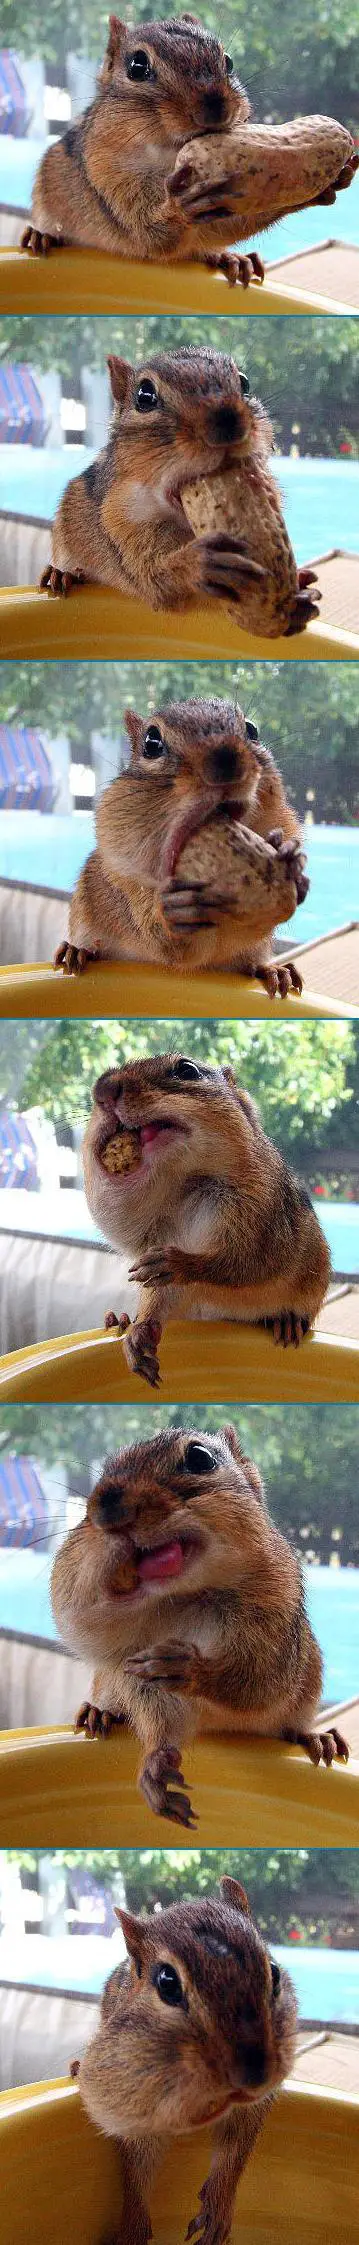 Funny Picture - Hungry Chipmunk